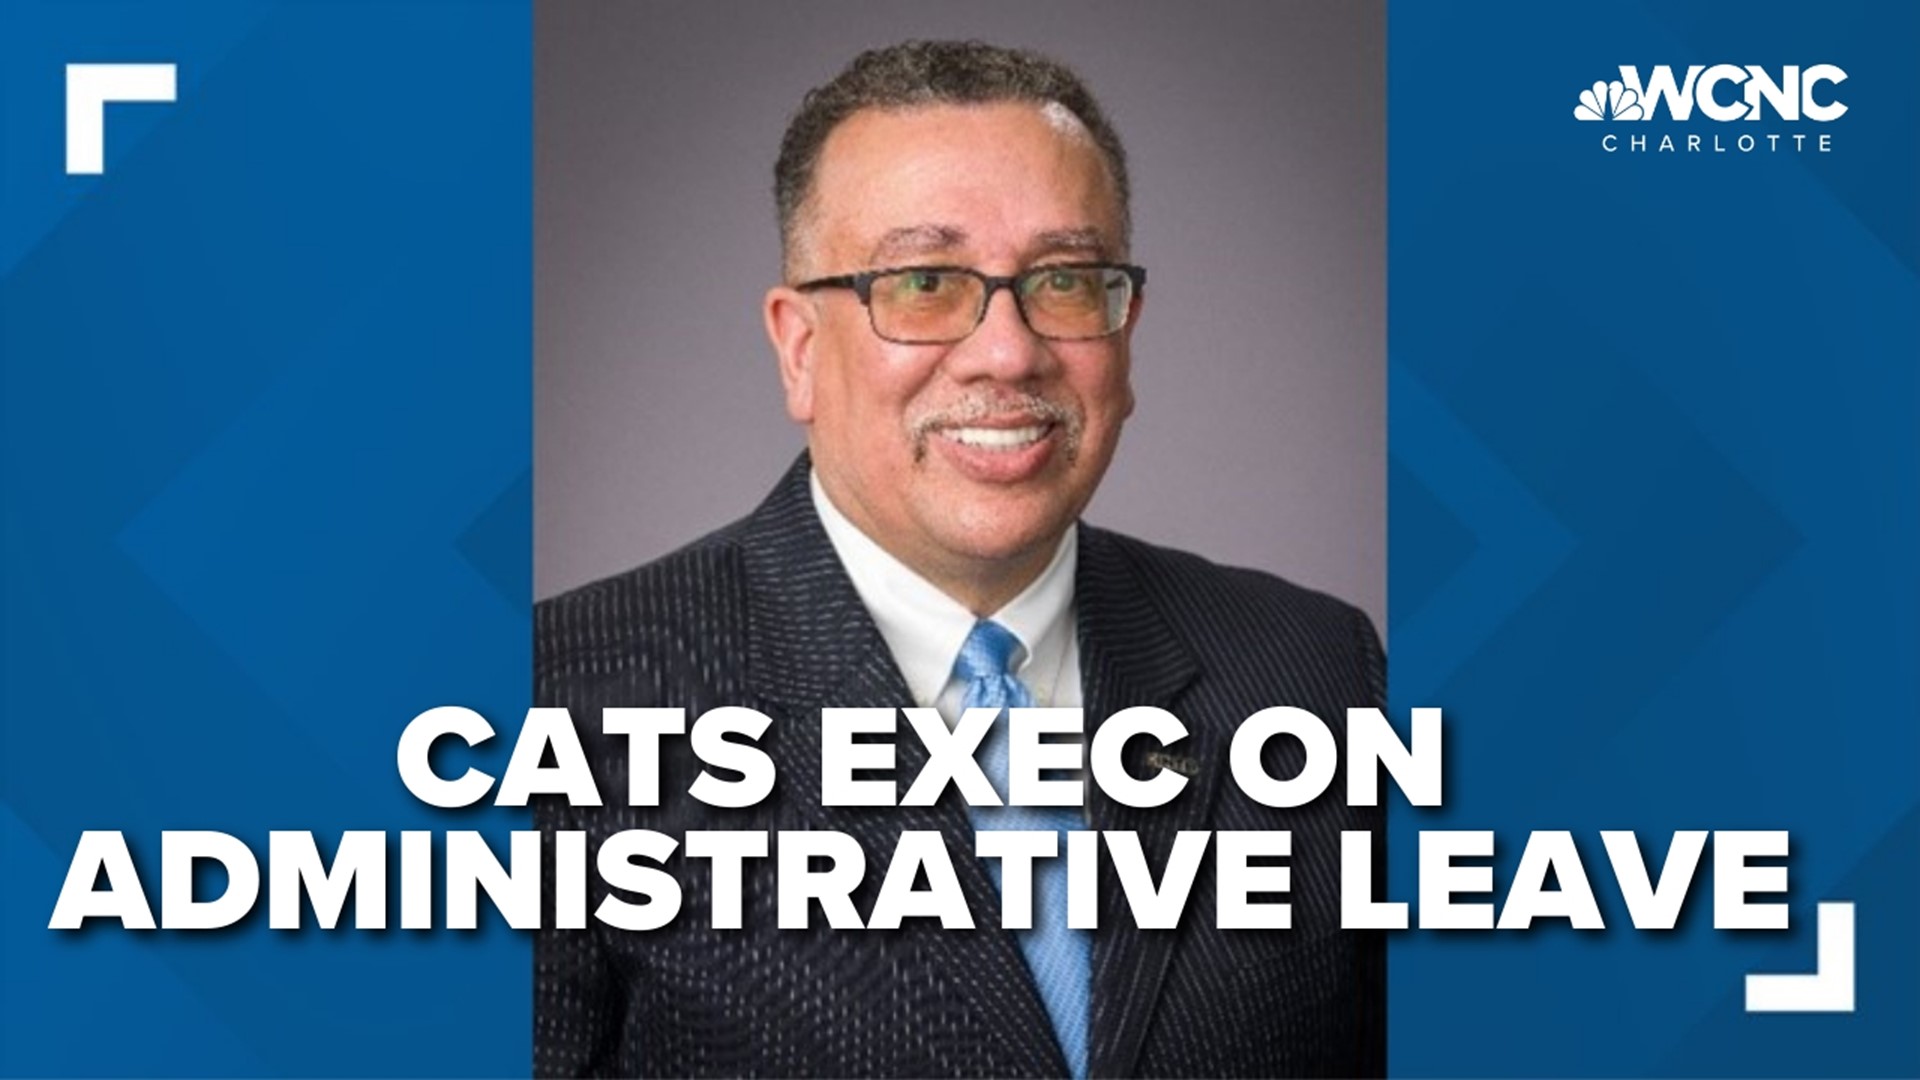 The announcement comes after former CATS CEO John Lewis resigned back in Nov. 2022.